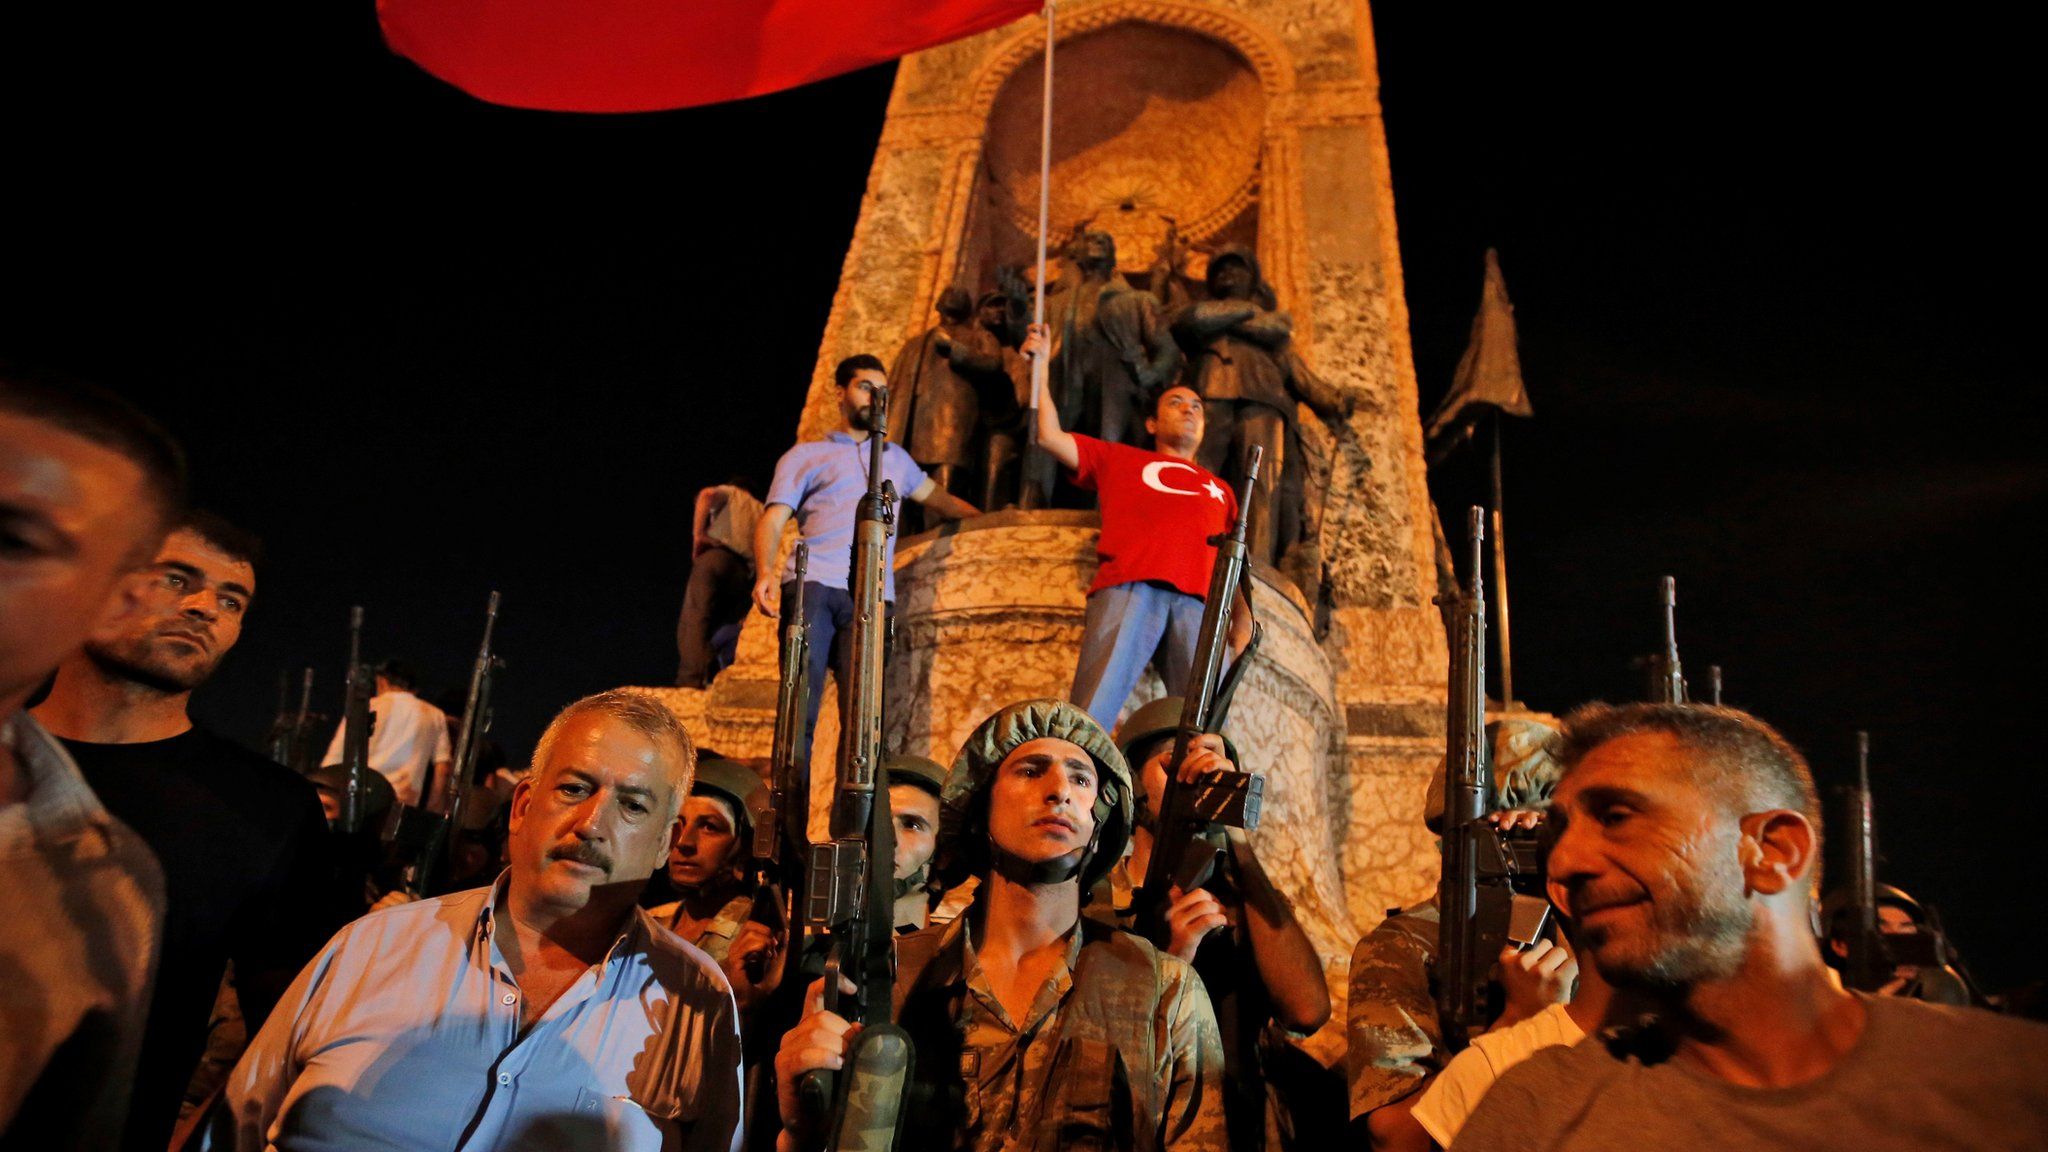 Soldiers and people in Turkey